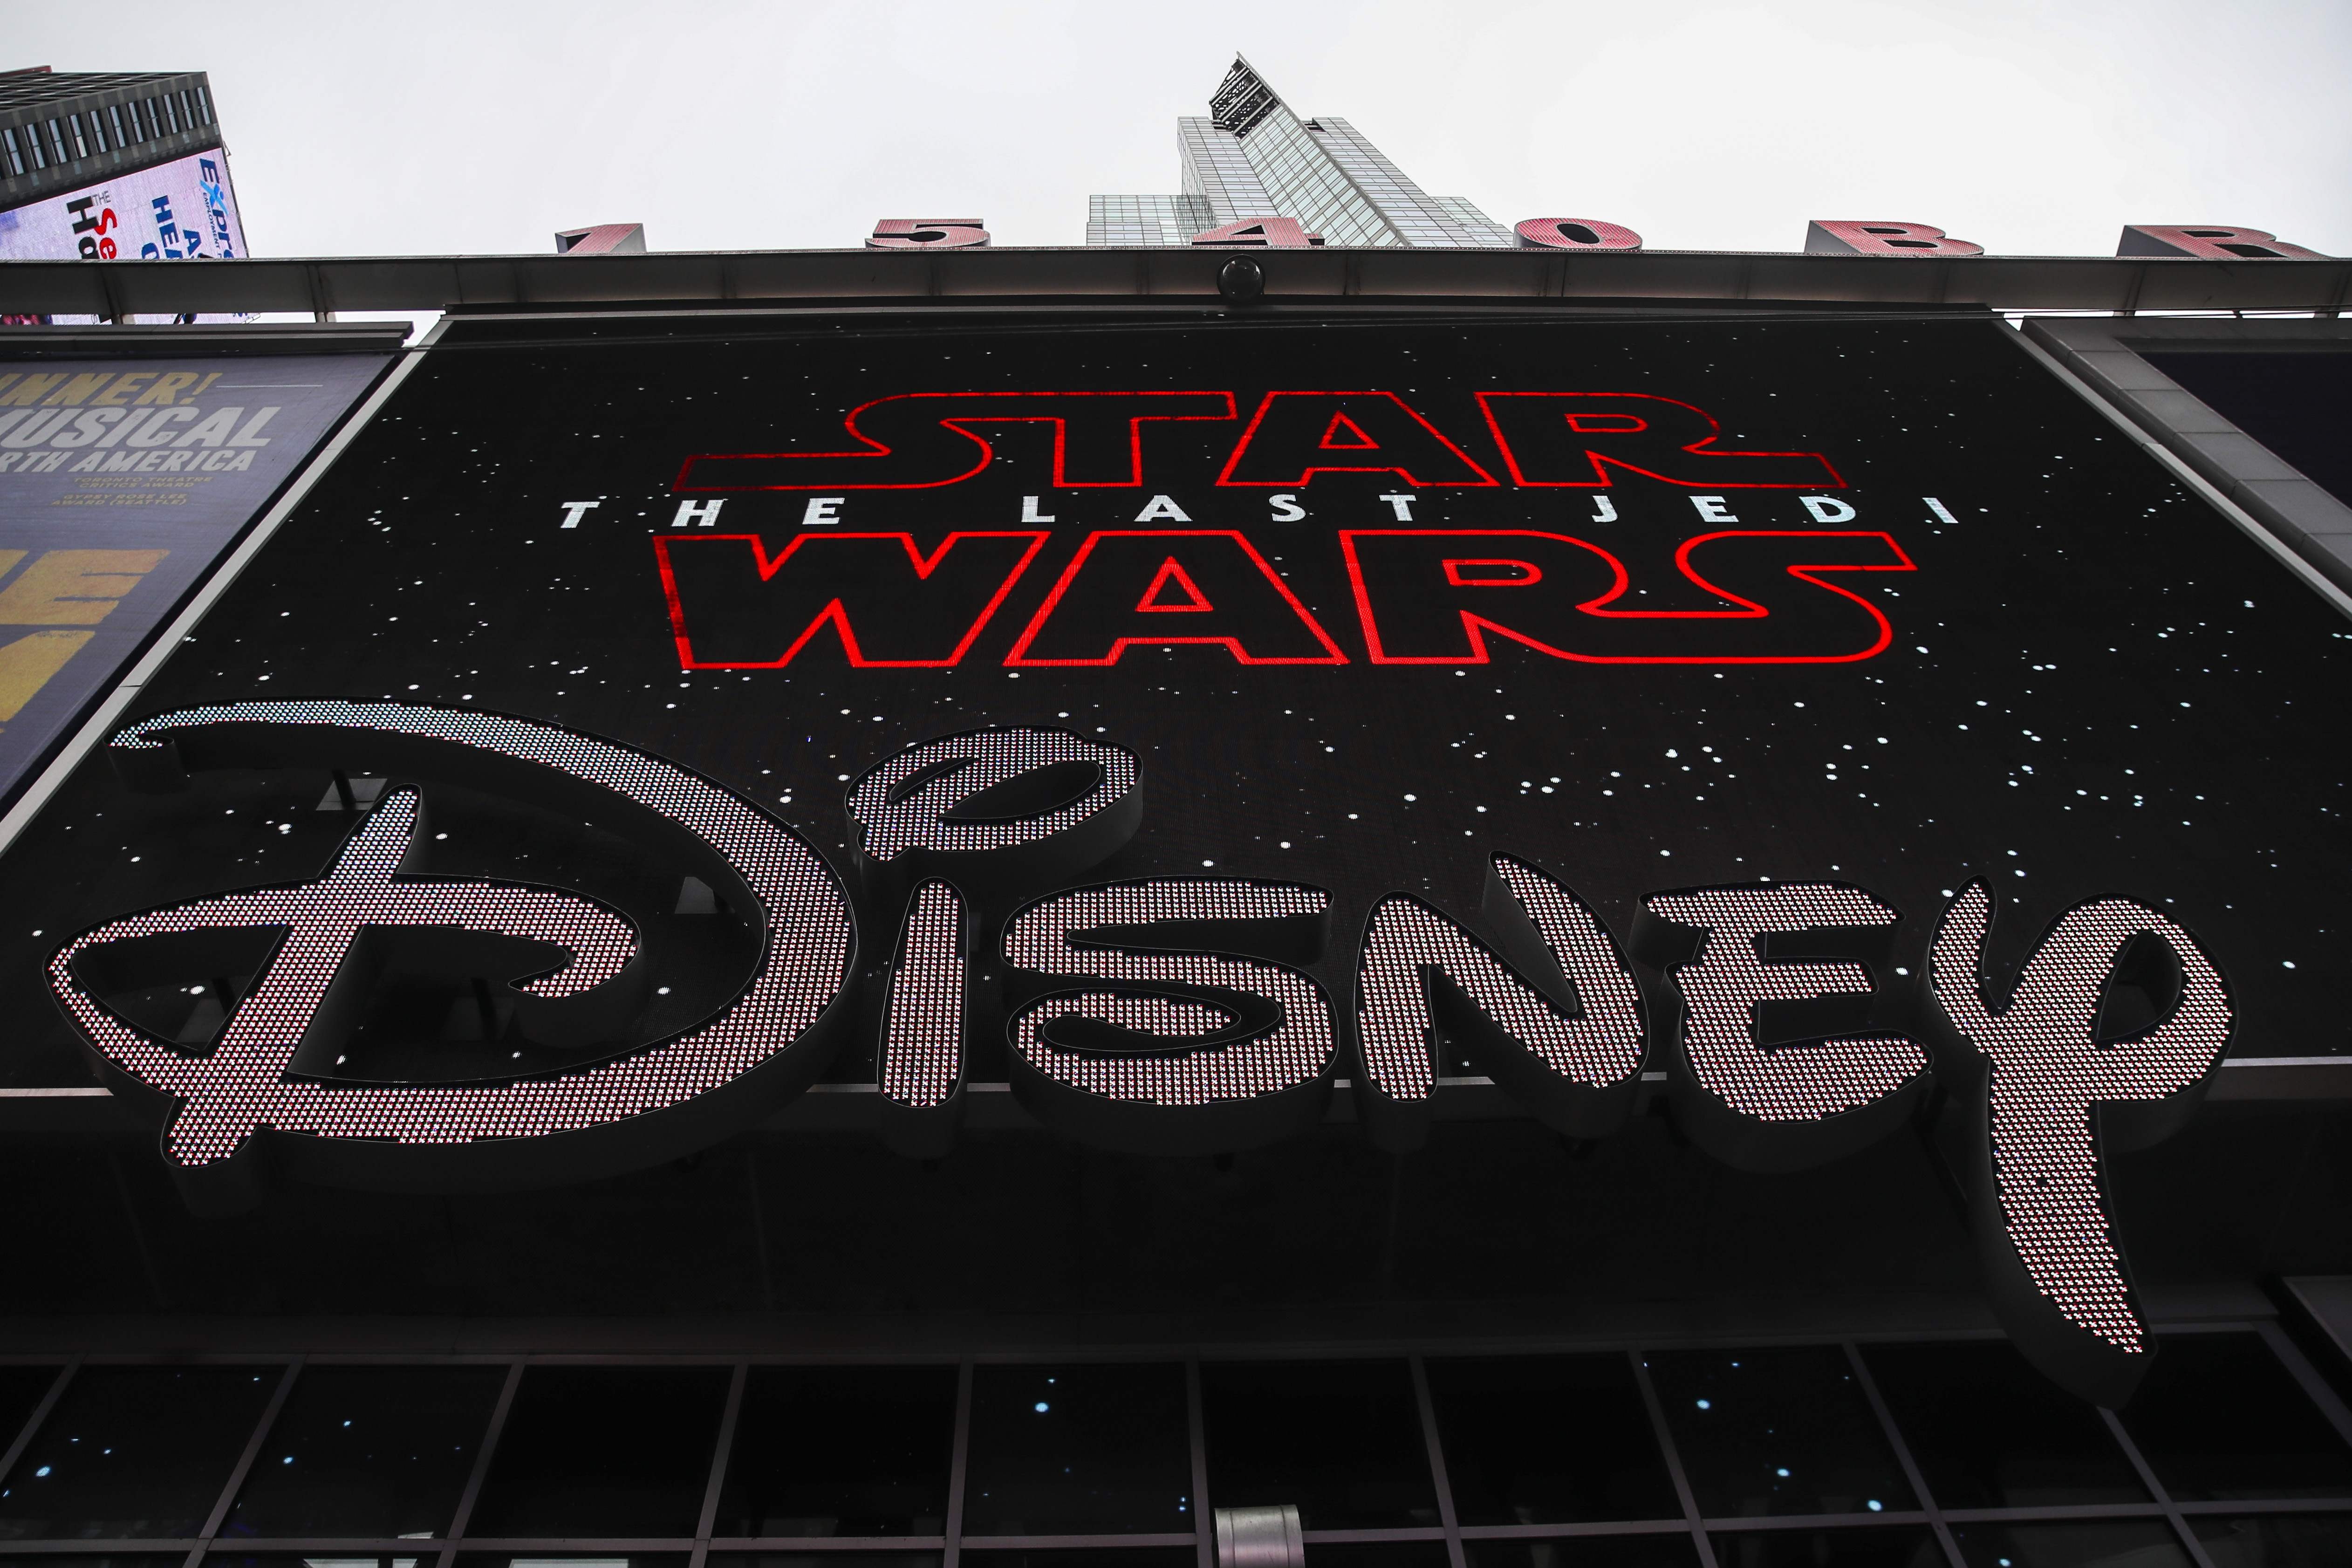 The Disney store in New York’s Times Square in December. Photo: Getty Images North America via AFP